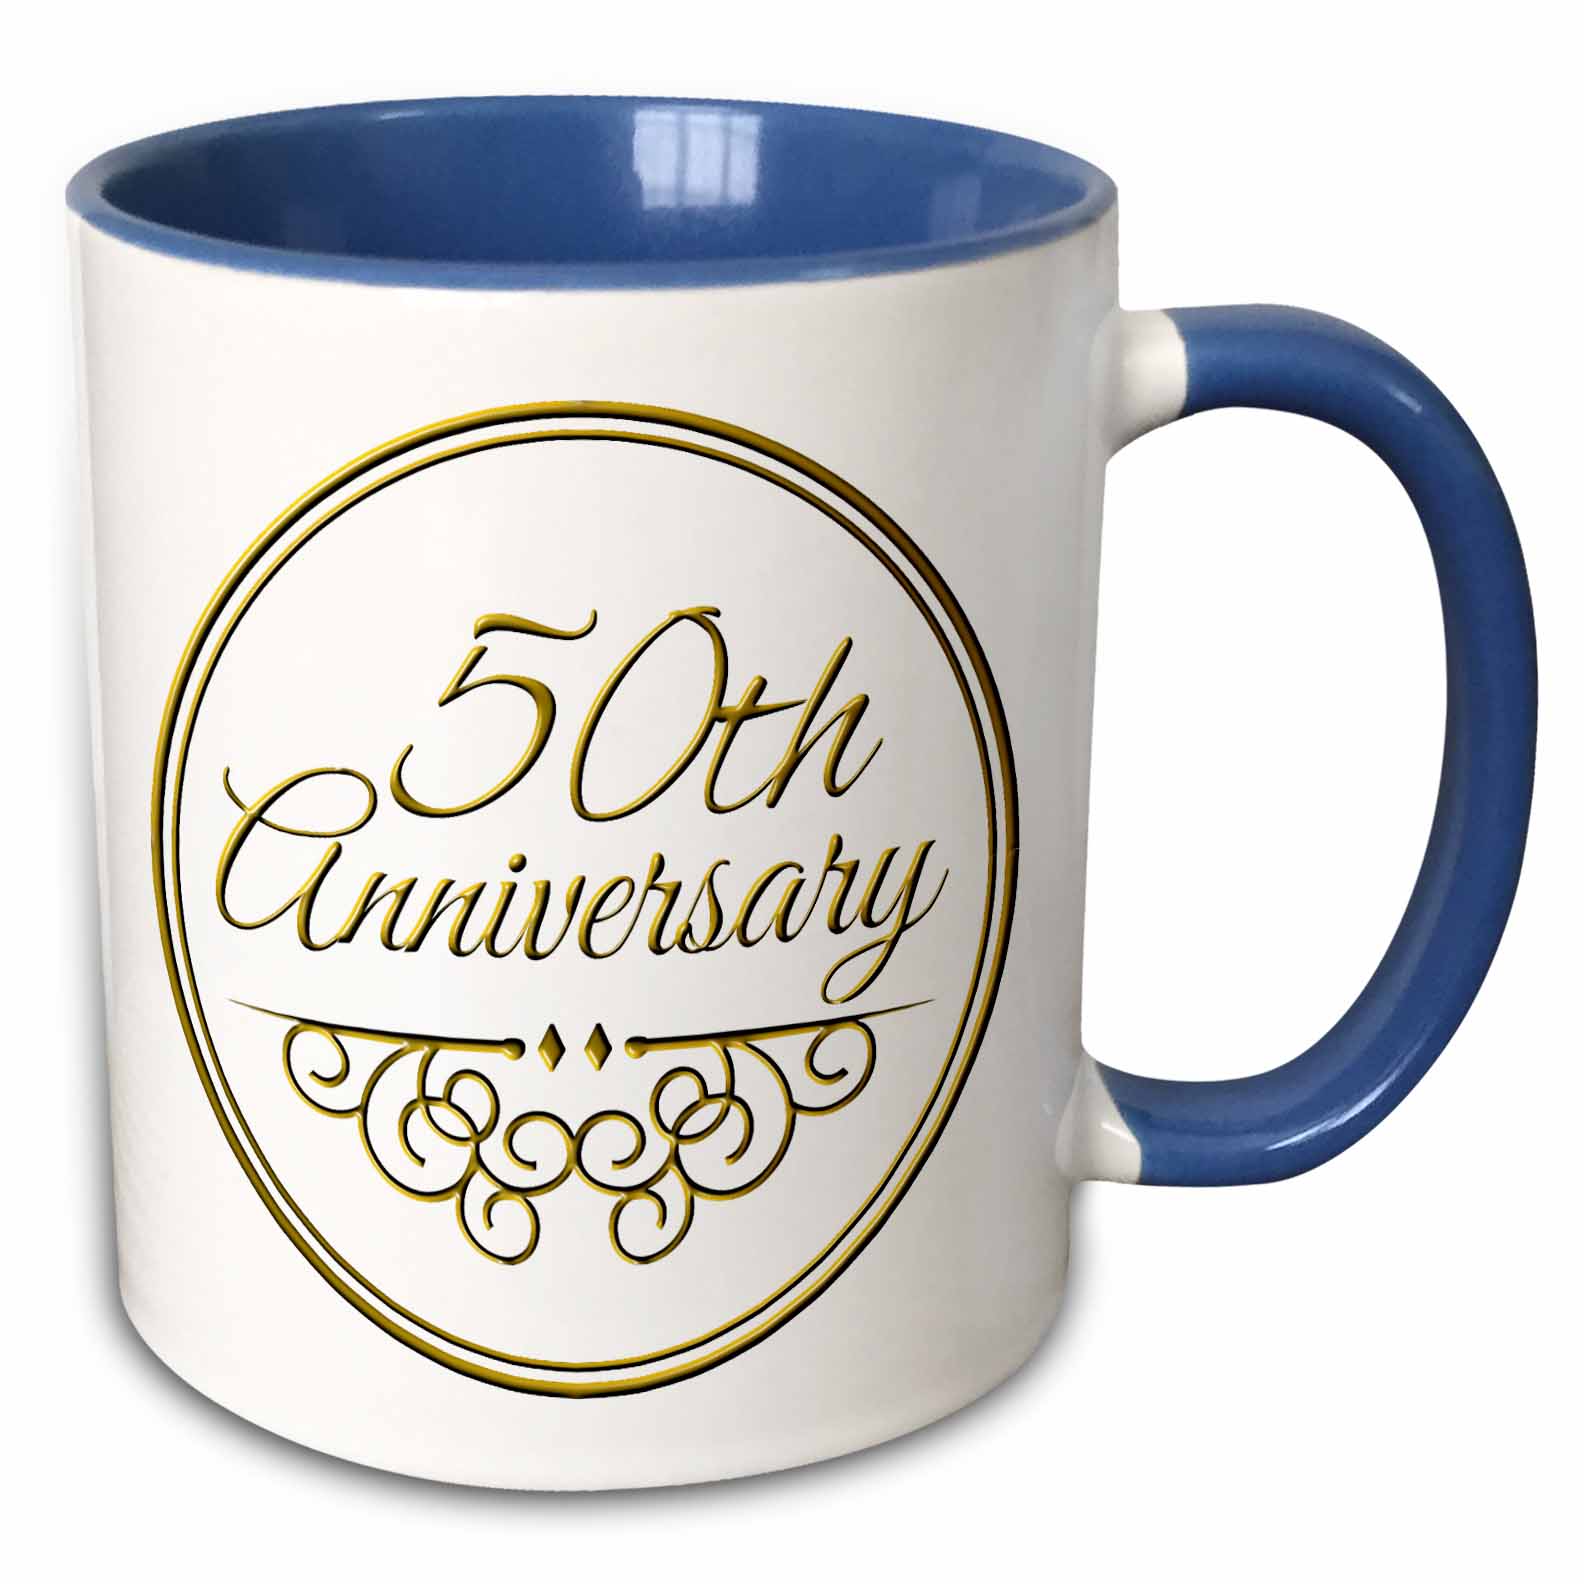 50th Anniversary gift - gold text for celebrating wedding anniversaries - 50 years married together 15oz Two-Tone Blue Mug mug-154492-11 - image 1 of 3